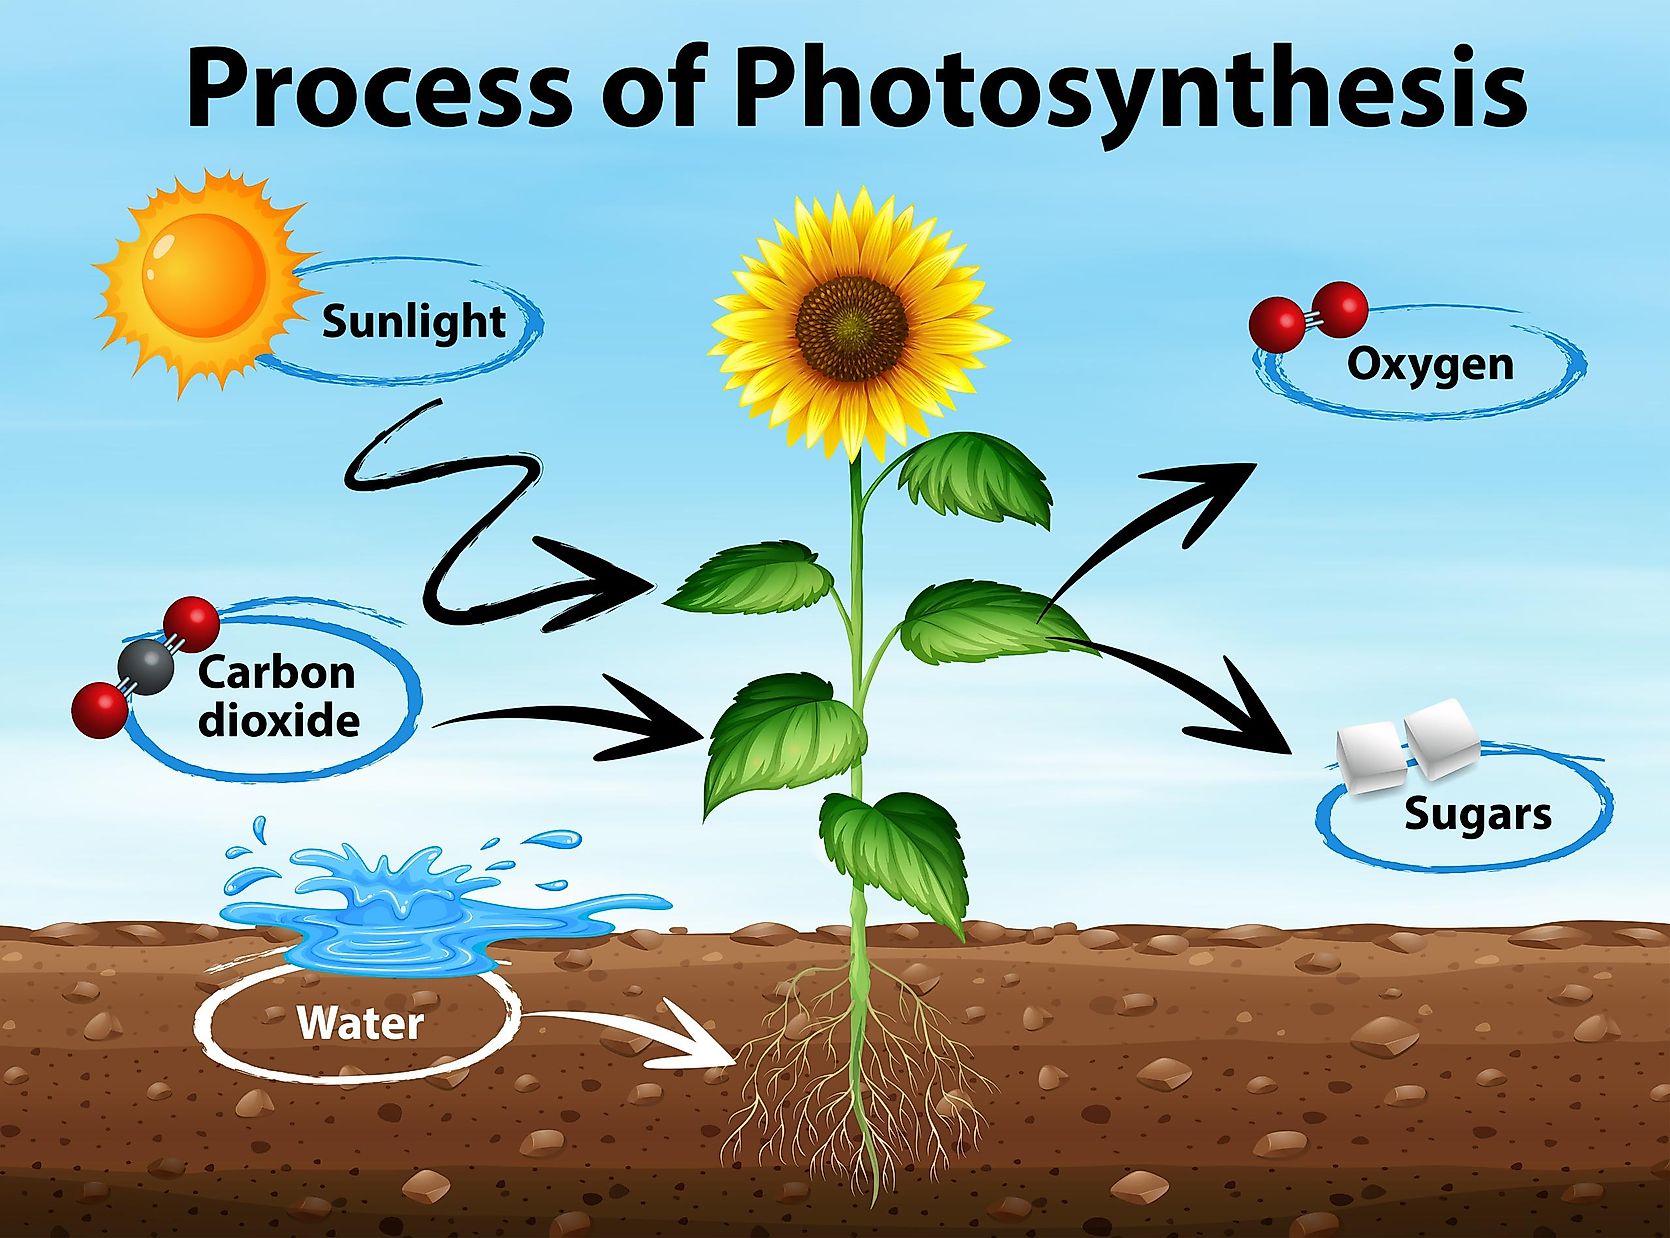 what is the rate of photosynthesis meaning